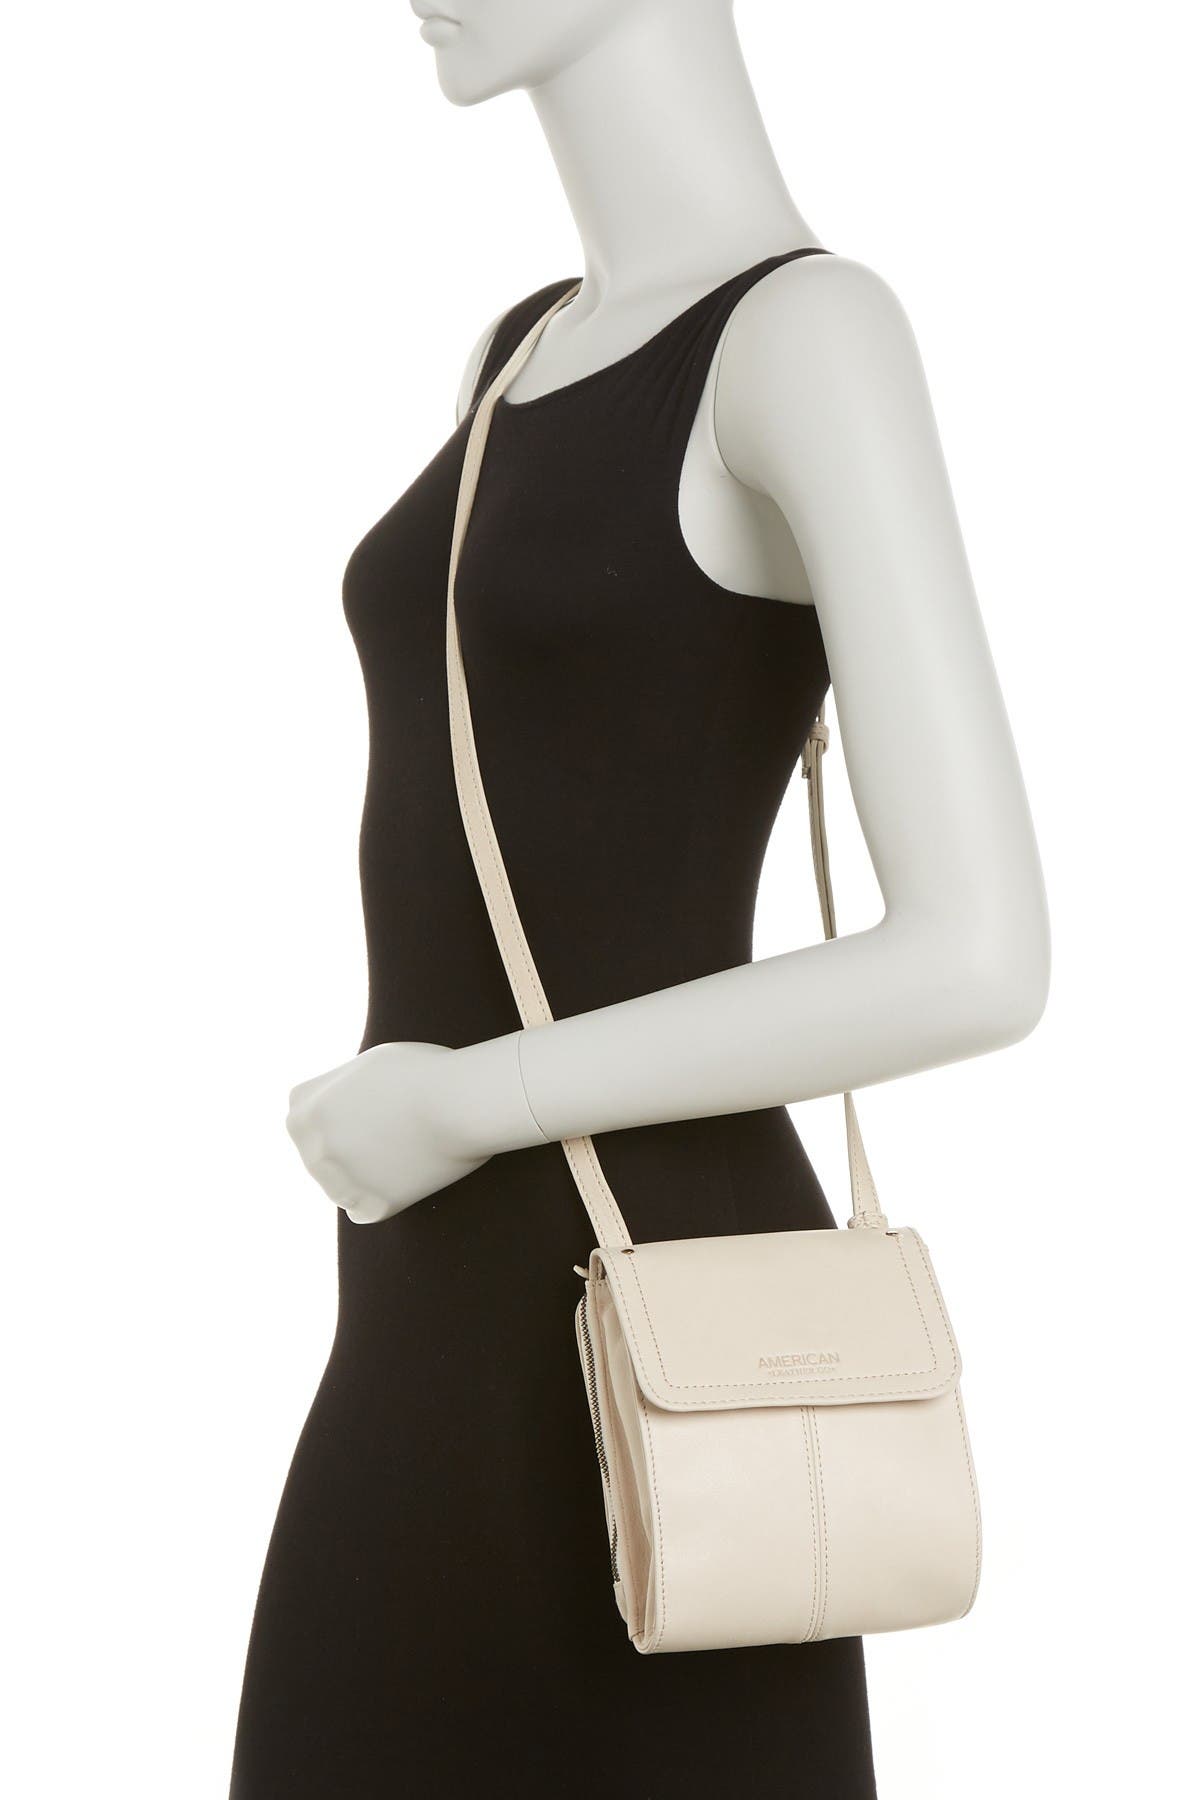 American Leather Co. Kansas Colorblock Crossbody Leather Bag In Stone Smooth